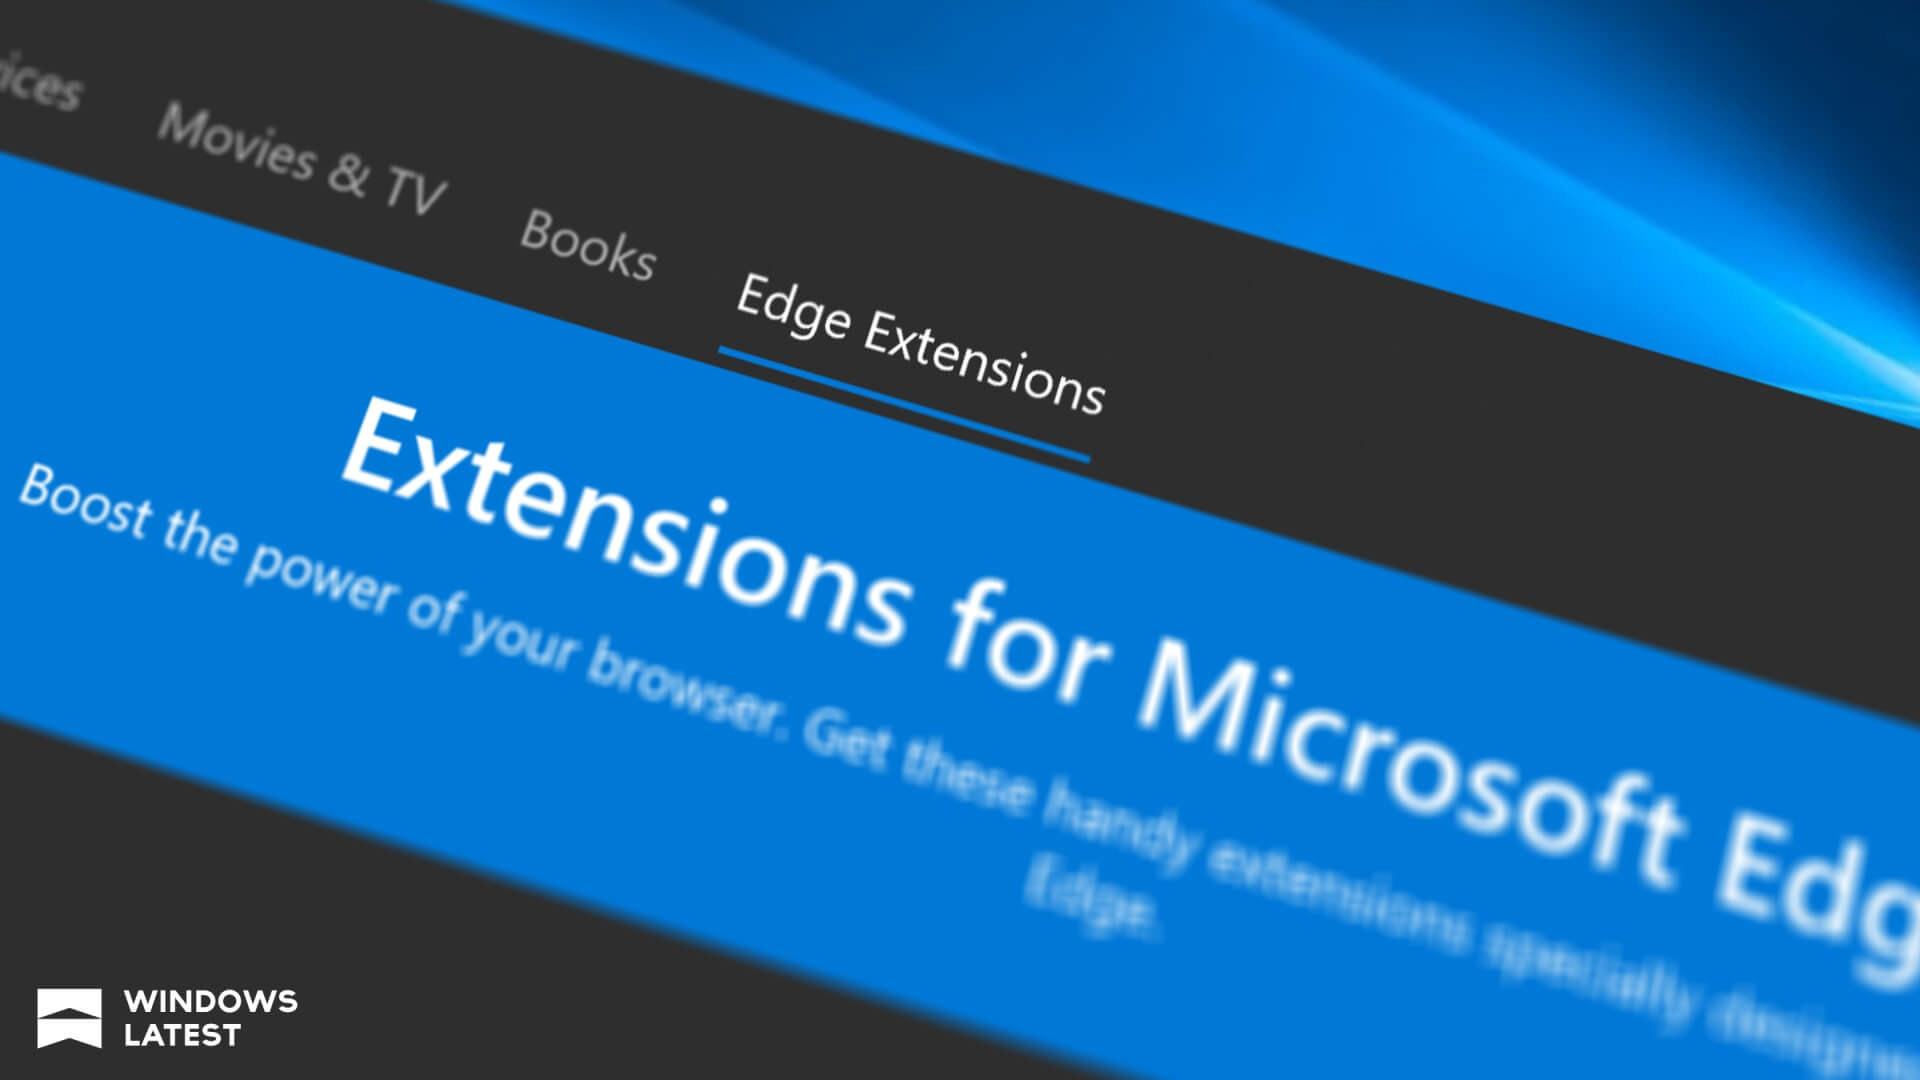 What we know so far about Microsoft’s new Edge browser for Windows 10 Microsoft-Edge-extensions.jpg